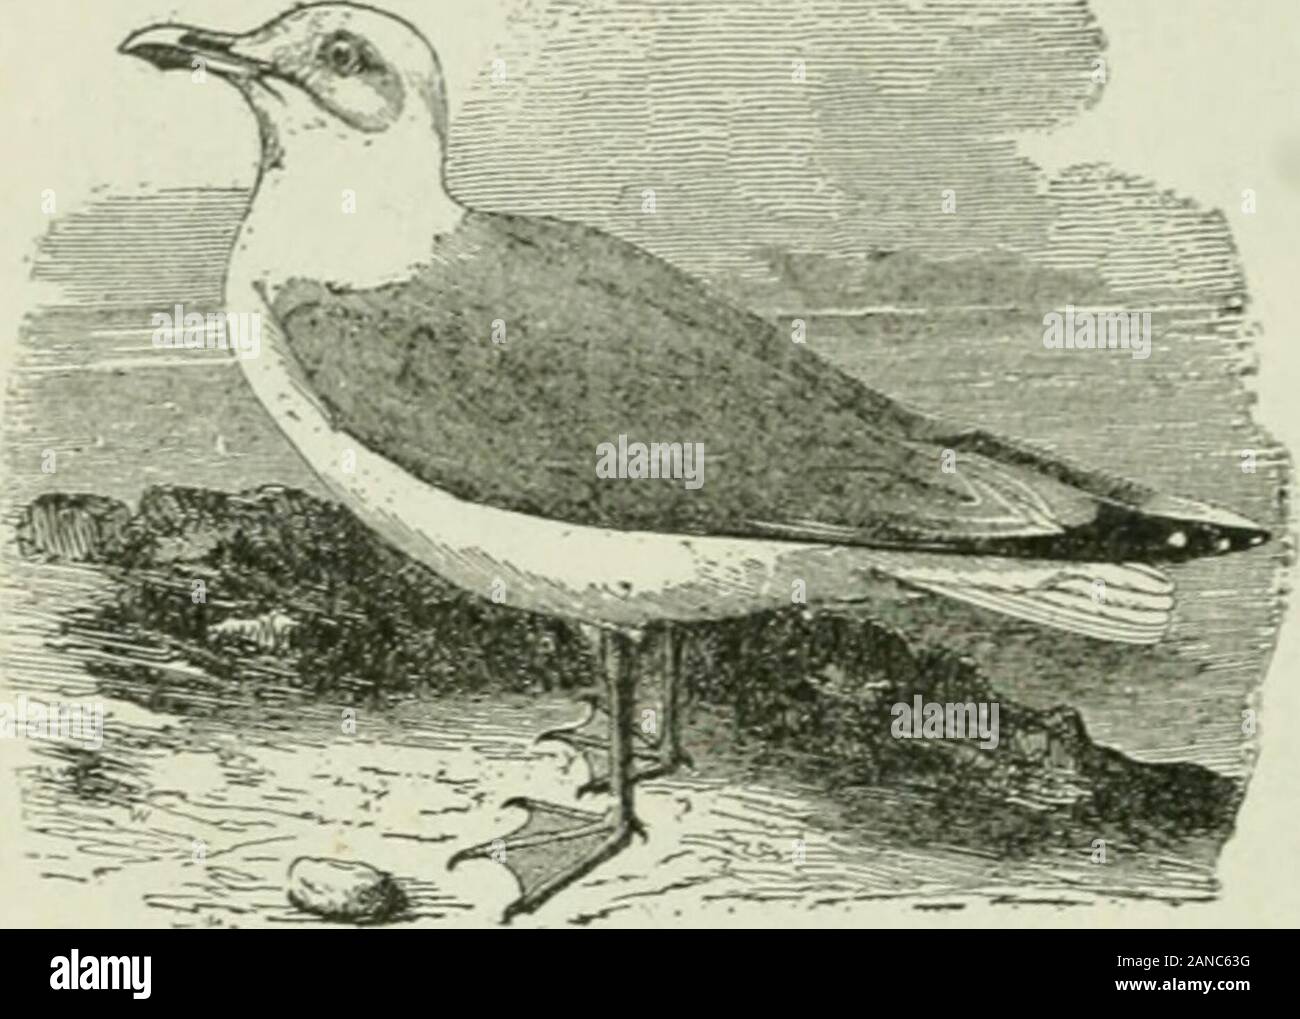 Beginners' zoology . Fig. 322. —Herring Gull. (Order?) Exercise in the Use of the Key. — Copy this list and write the name of the order to which each of the birds belongs. (Key, page I77-) Cockatoo (Fig. 320) Wren (Fig. 310) Pheasant (Fig. 319) Sacred Ibis (Fig. 328) Apteryx (Fig. 318) Wood Duck (Fig. 314) Screech Owl (Fig. 311) Lyre bird (Fig. 327) Jacana (Fig. 324) Nightingale (Fig. 325) Road Runner (Fig. 313) Sea Gull (Fig. 322) Top-knot Quail (Fig. Ostrich (Fig. 332) Heron (Fig. 315) 329) Penguin (Fig. 330) Hawk (Fig. 312) BIRDS 177 KEY, OR TABLE, FOR CLASSIFYING BIRDS {Class Aves) INTO OR Stock Photo